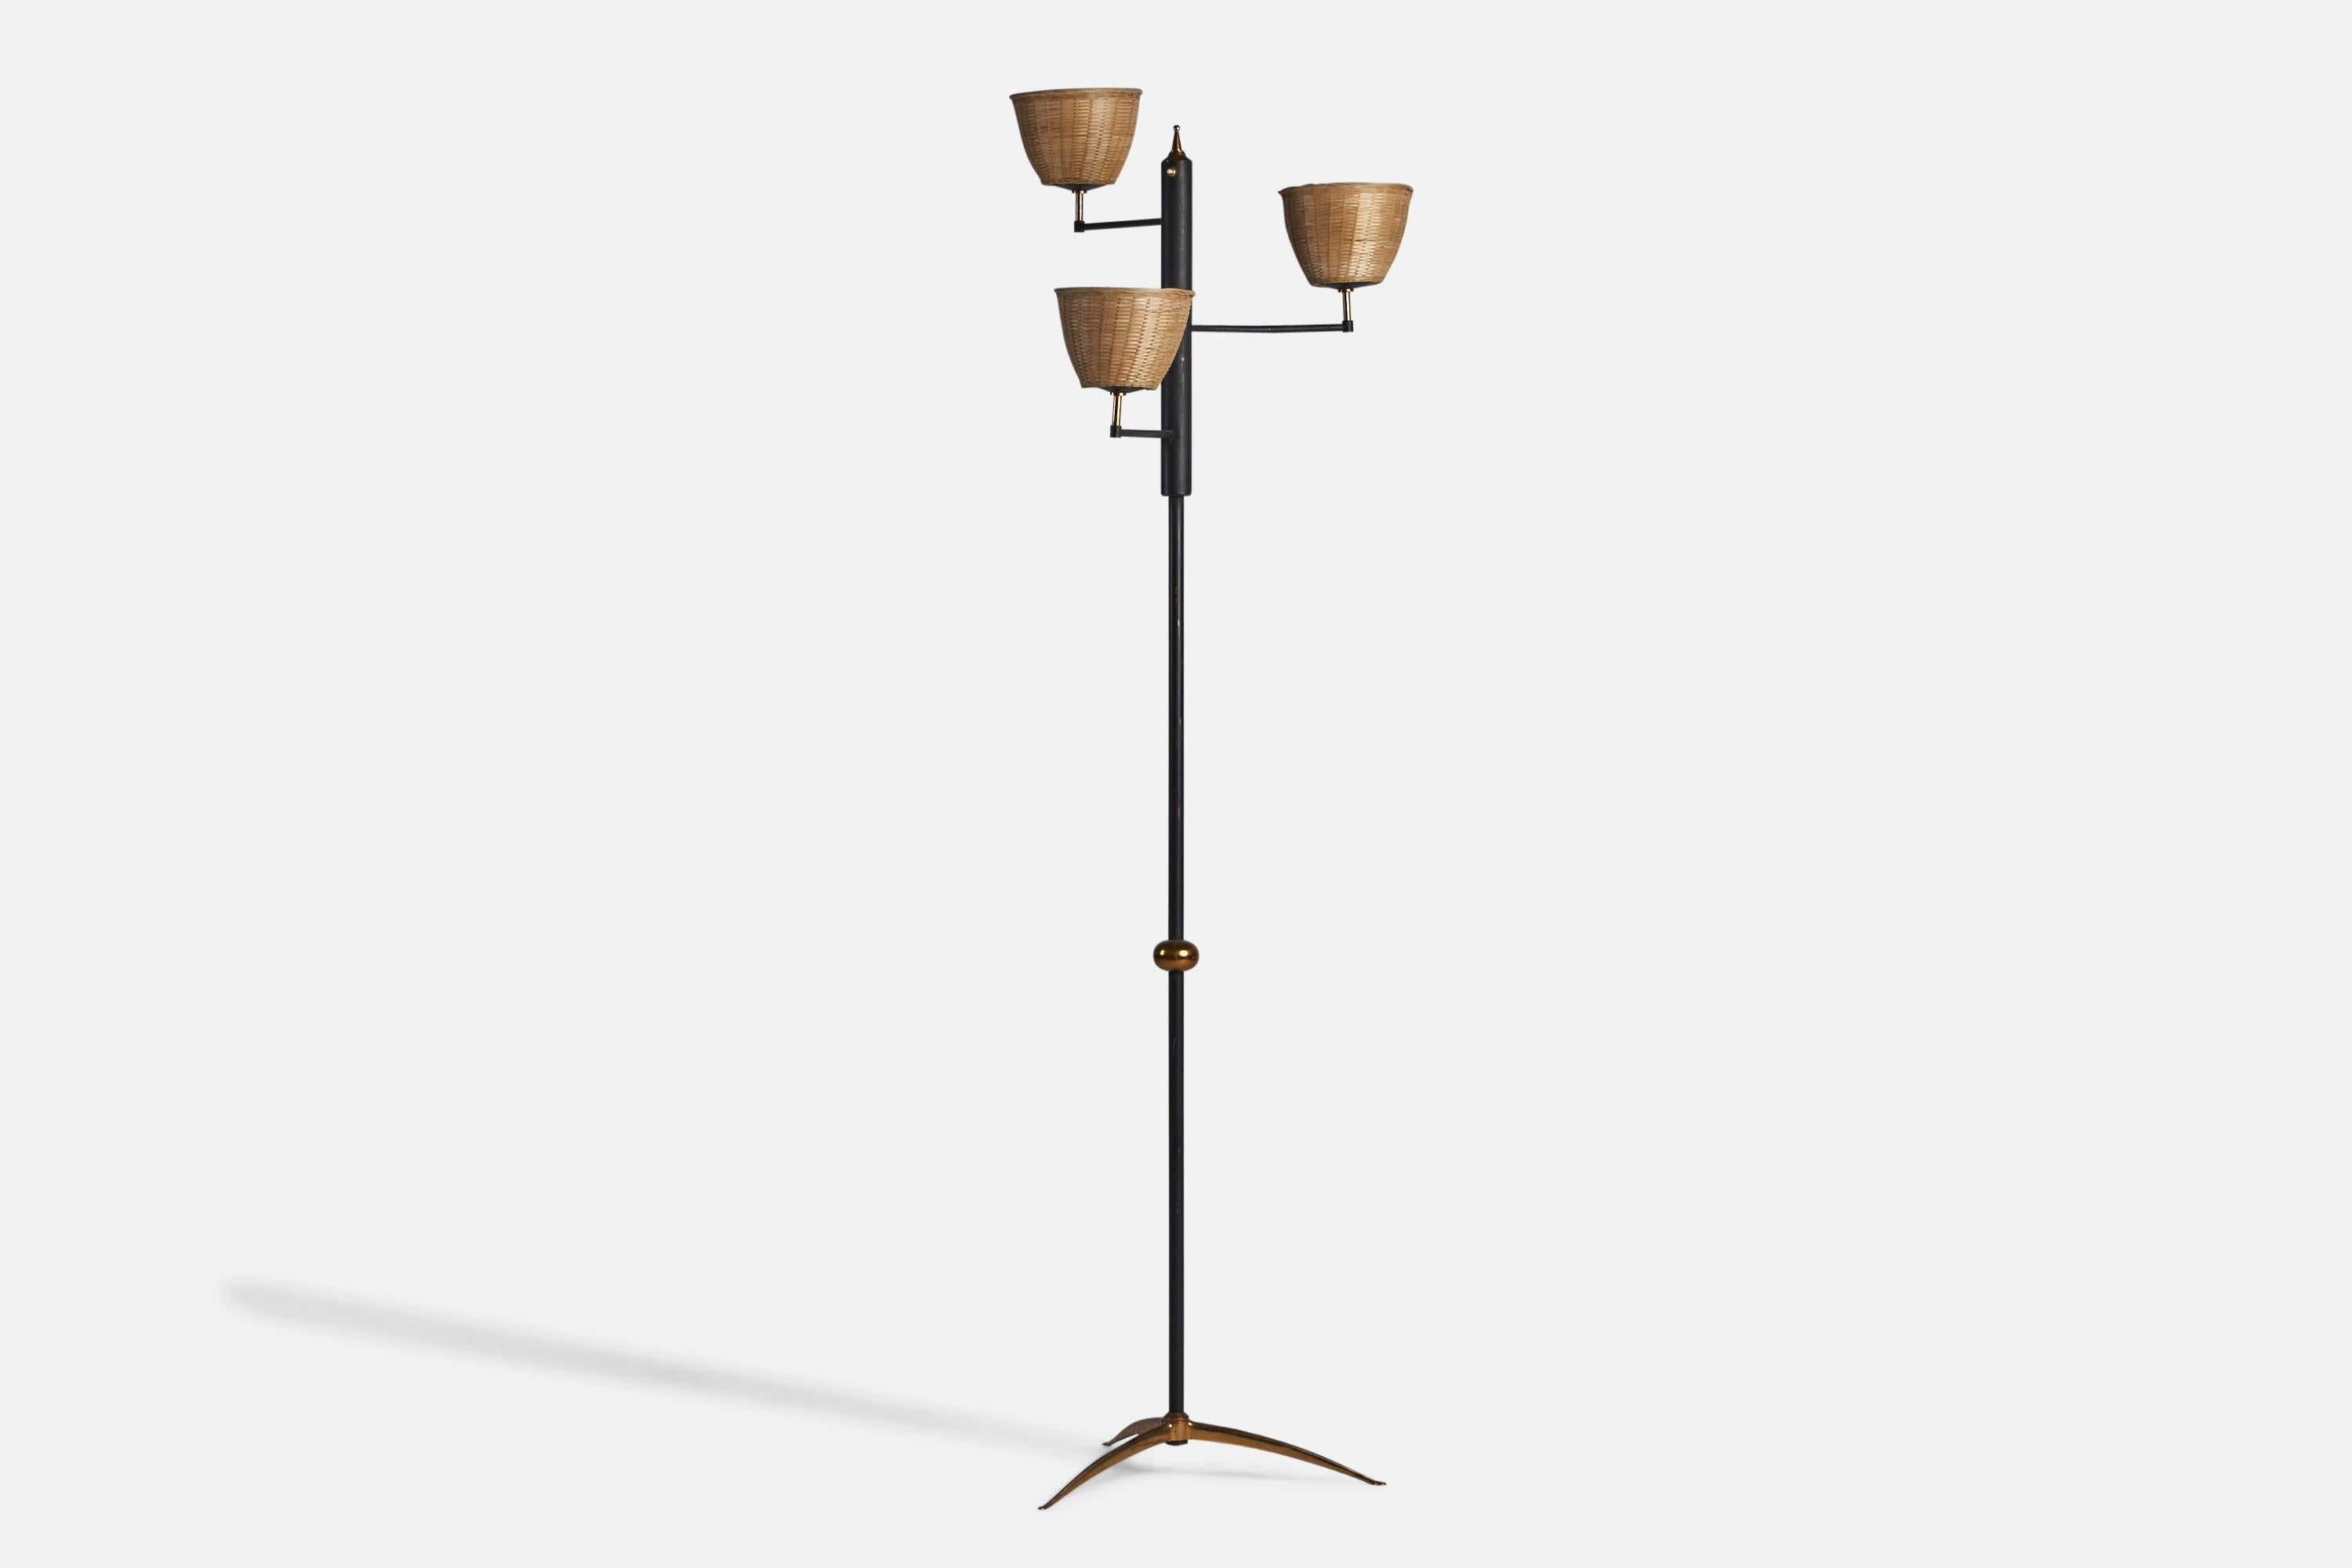 
A three-armed brass, black-lacquered metal and rattan floor lamp designed and produced in Italy, 1940s.
Overall Dimensions (inches): 68.75” H x 24” Diameter
Bulb Specifications: E-14 Bulb
Number of Sockets: 3
All lighting will be converted for US